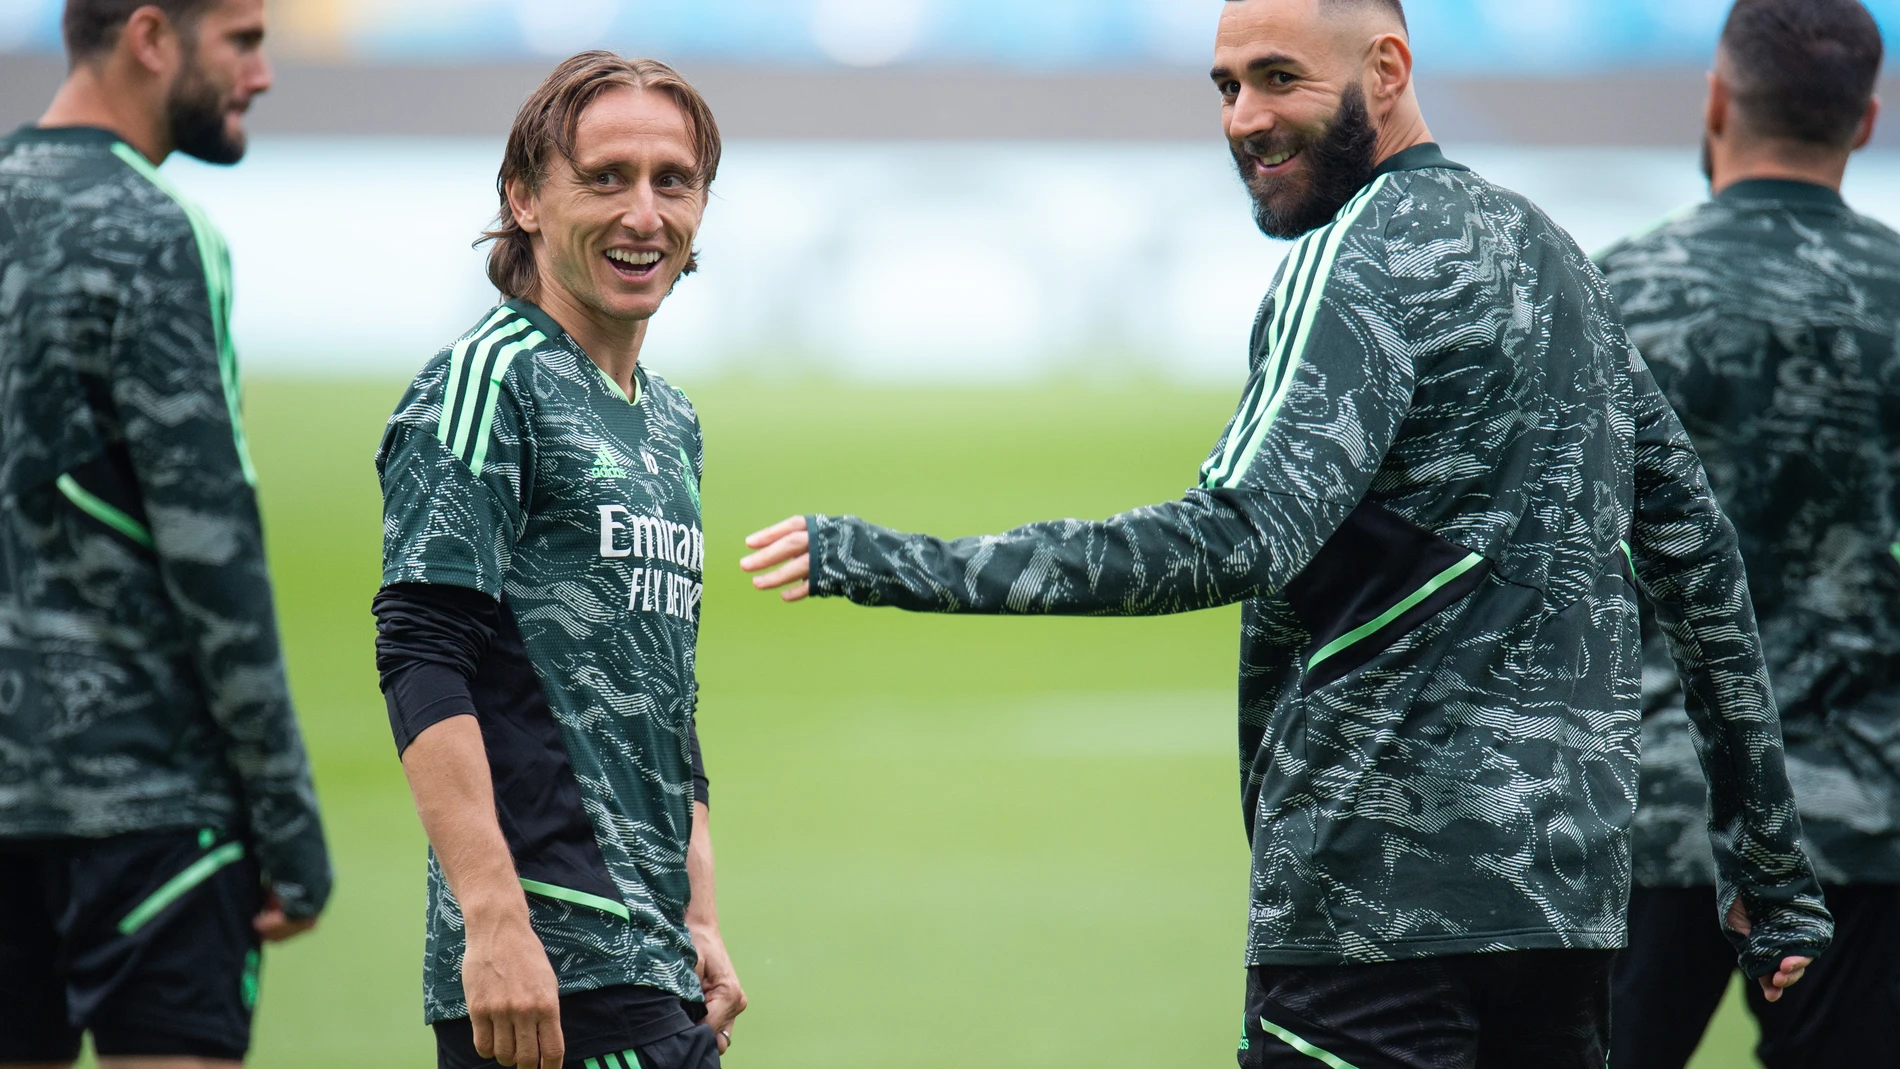 Manchester (United Kingdom), 16/05/2023.- Real Madrid's players Luka Modric (L) and Karim Benzema (R) attend a training session held at the Etihad Stadium, Manchester, Britain, 16 May 2023. Real Madrid face Manchester City in a UEFA Champions League semi-finals, 2nd leg soccer match on 17 May. (Liga de Campeones, Reino Unido) EFE/EPA/PETER POWELL 